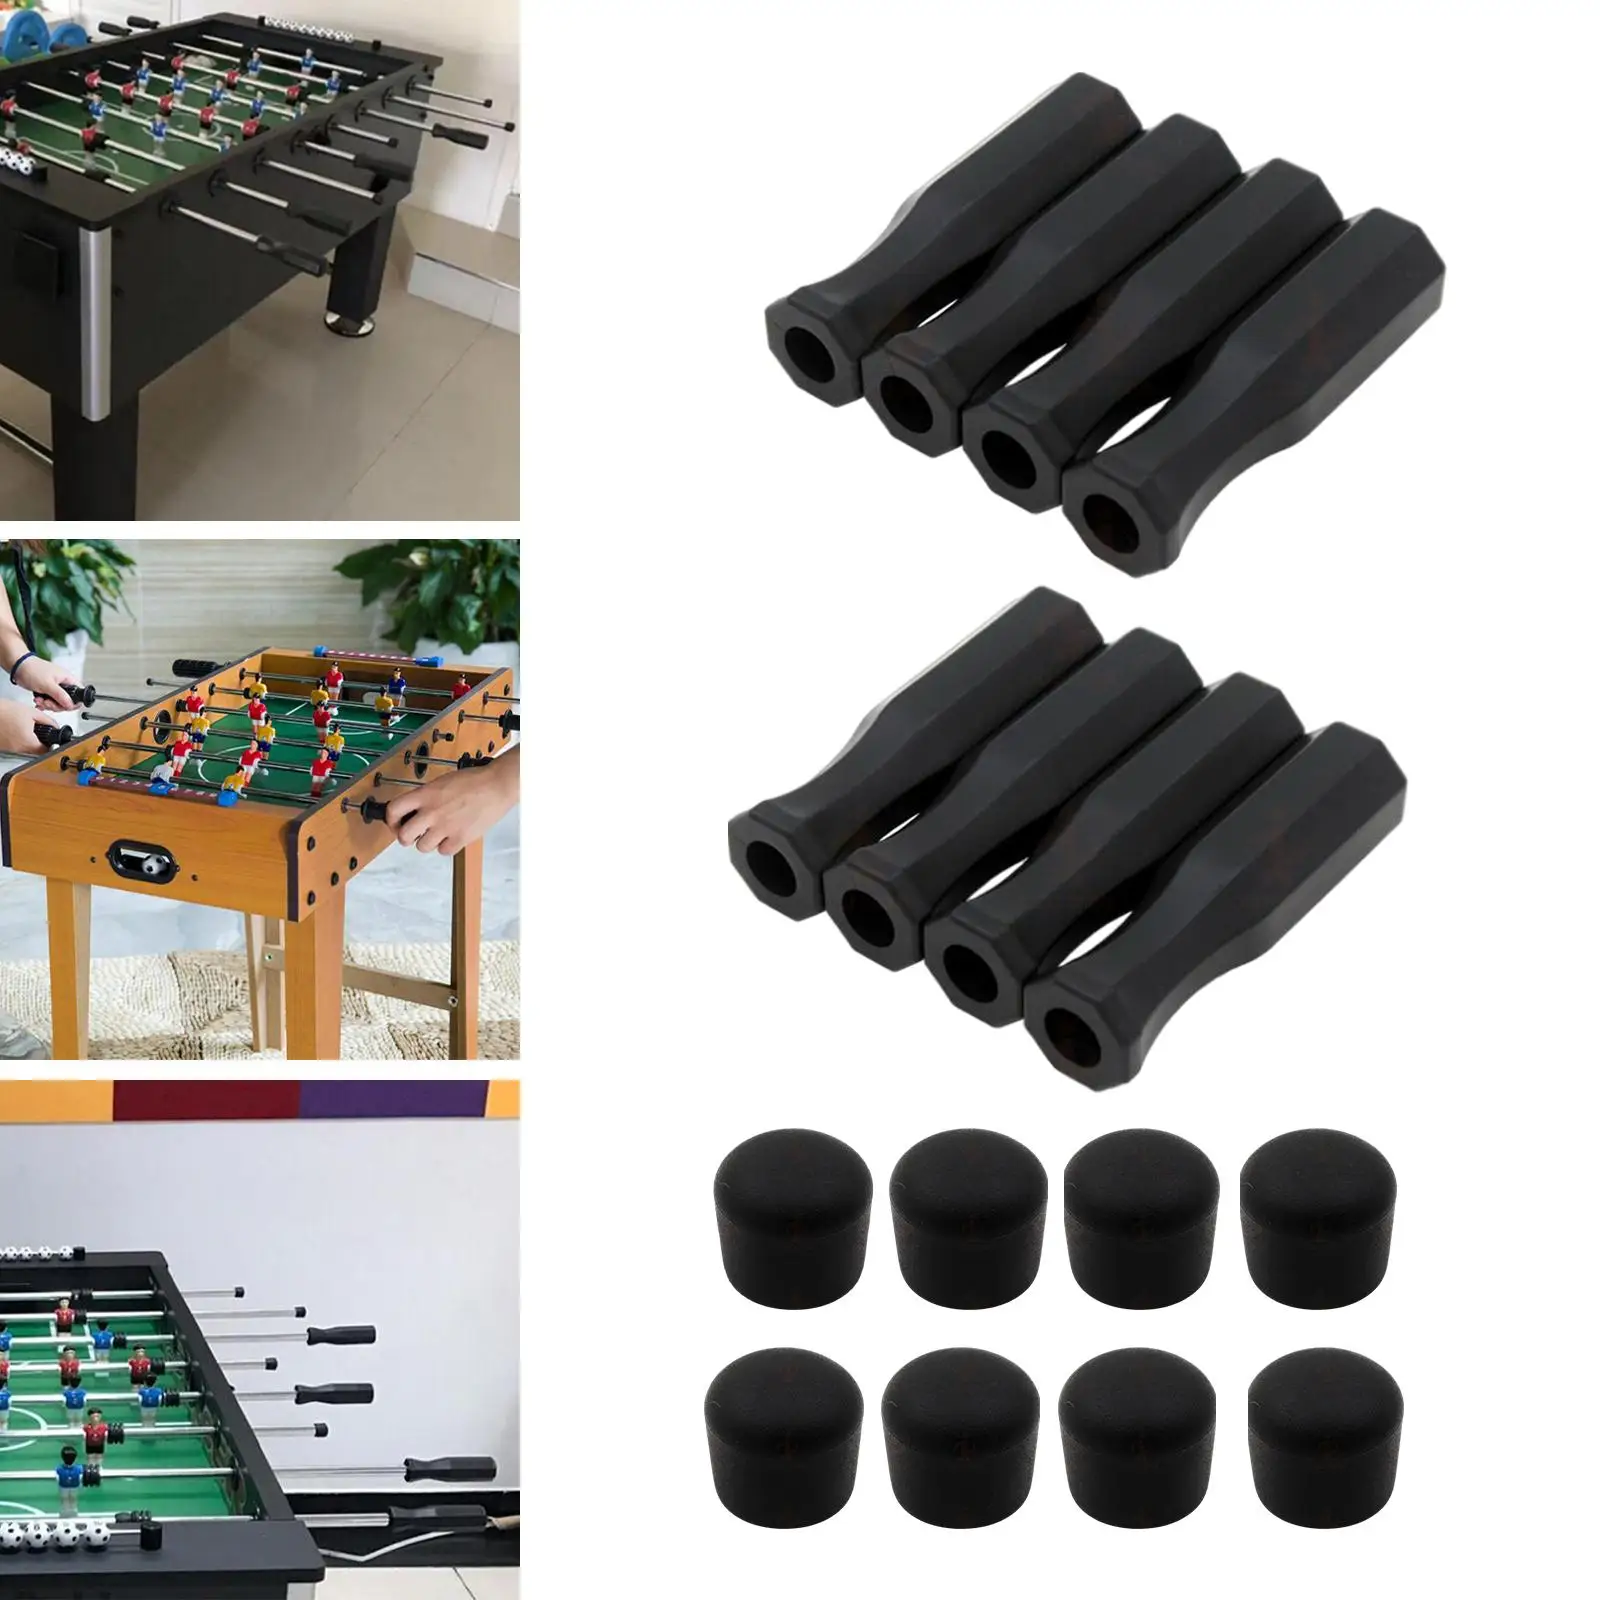 16x Octagonal Handles and Safety End Caps for Standard Foosball Tables Replacement